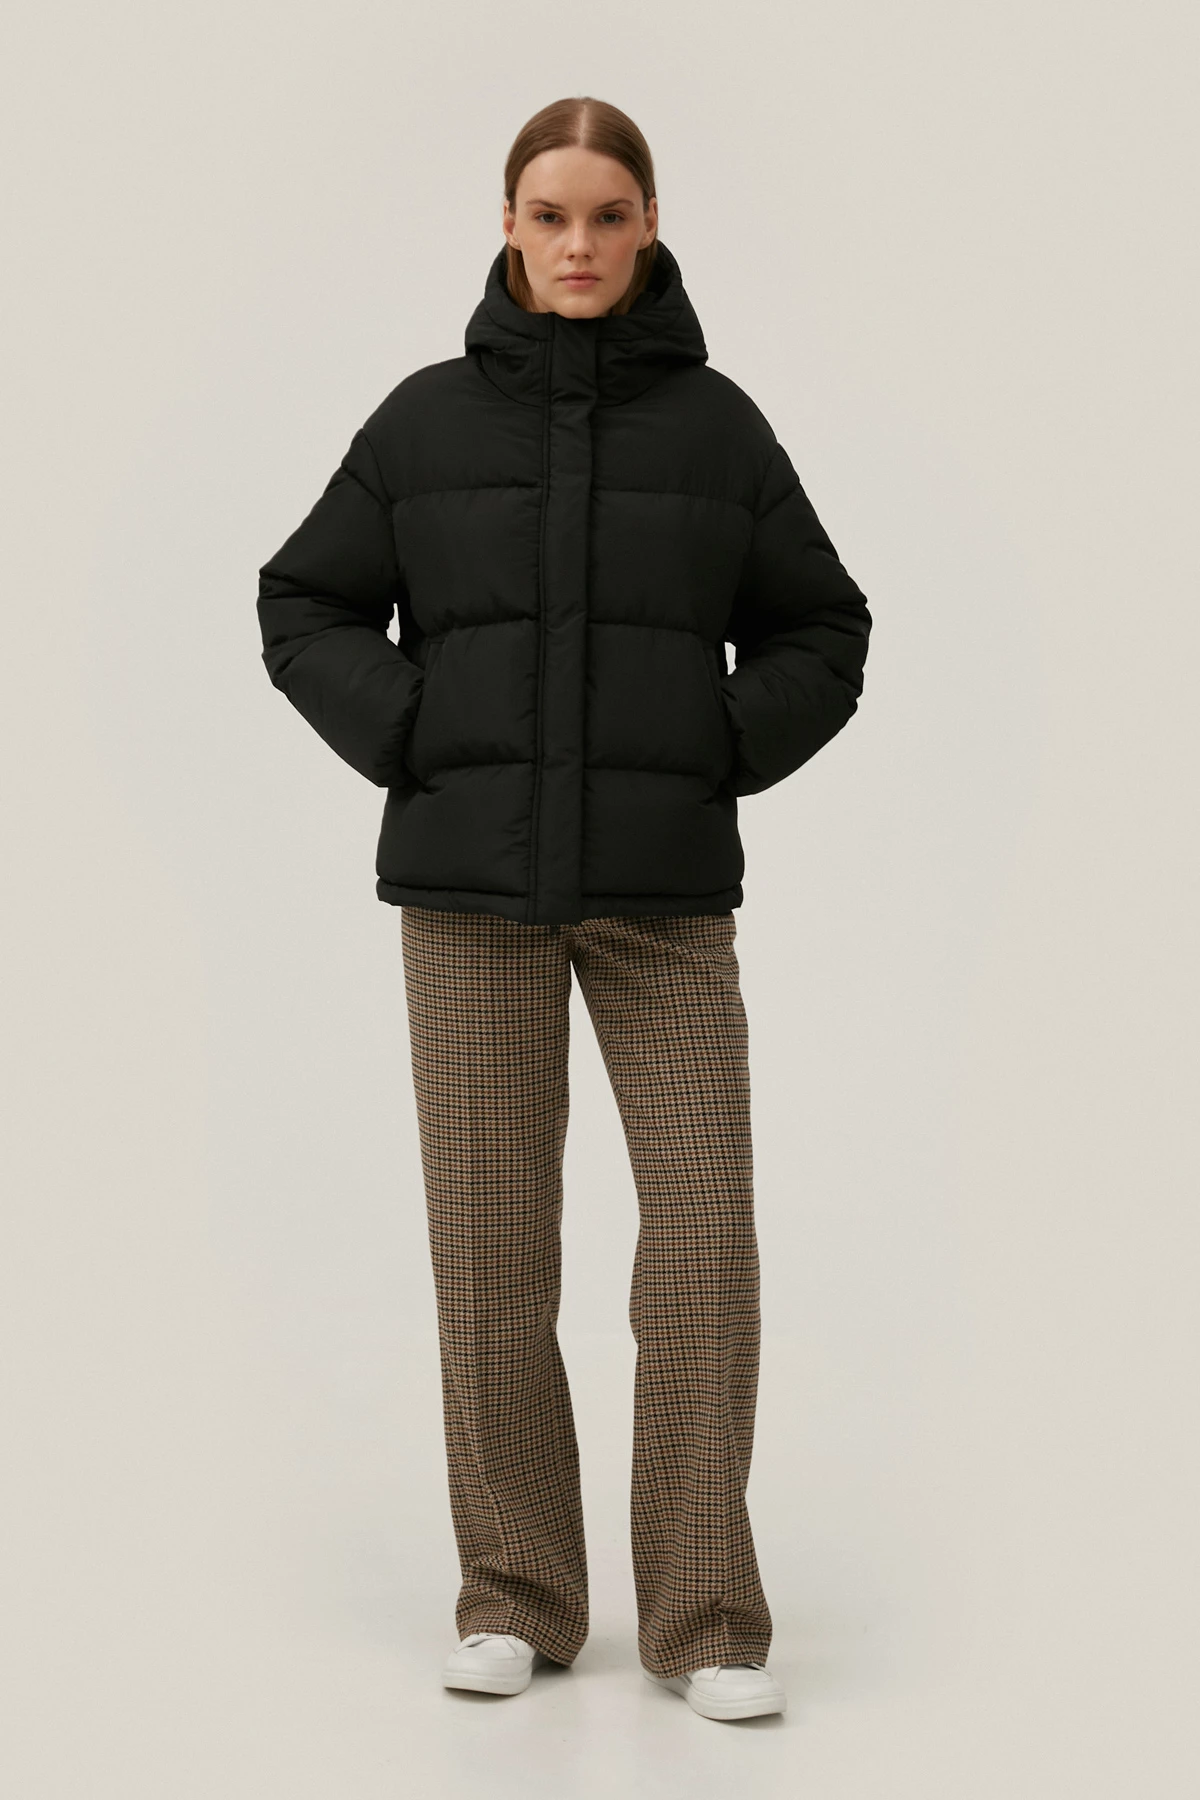 Black quilted jacket with eco-down insulation, photo 4